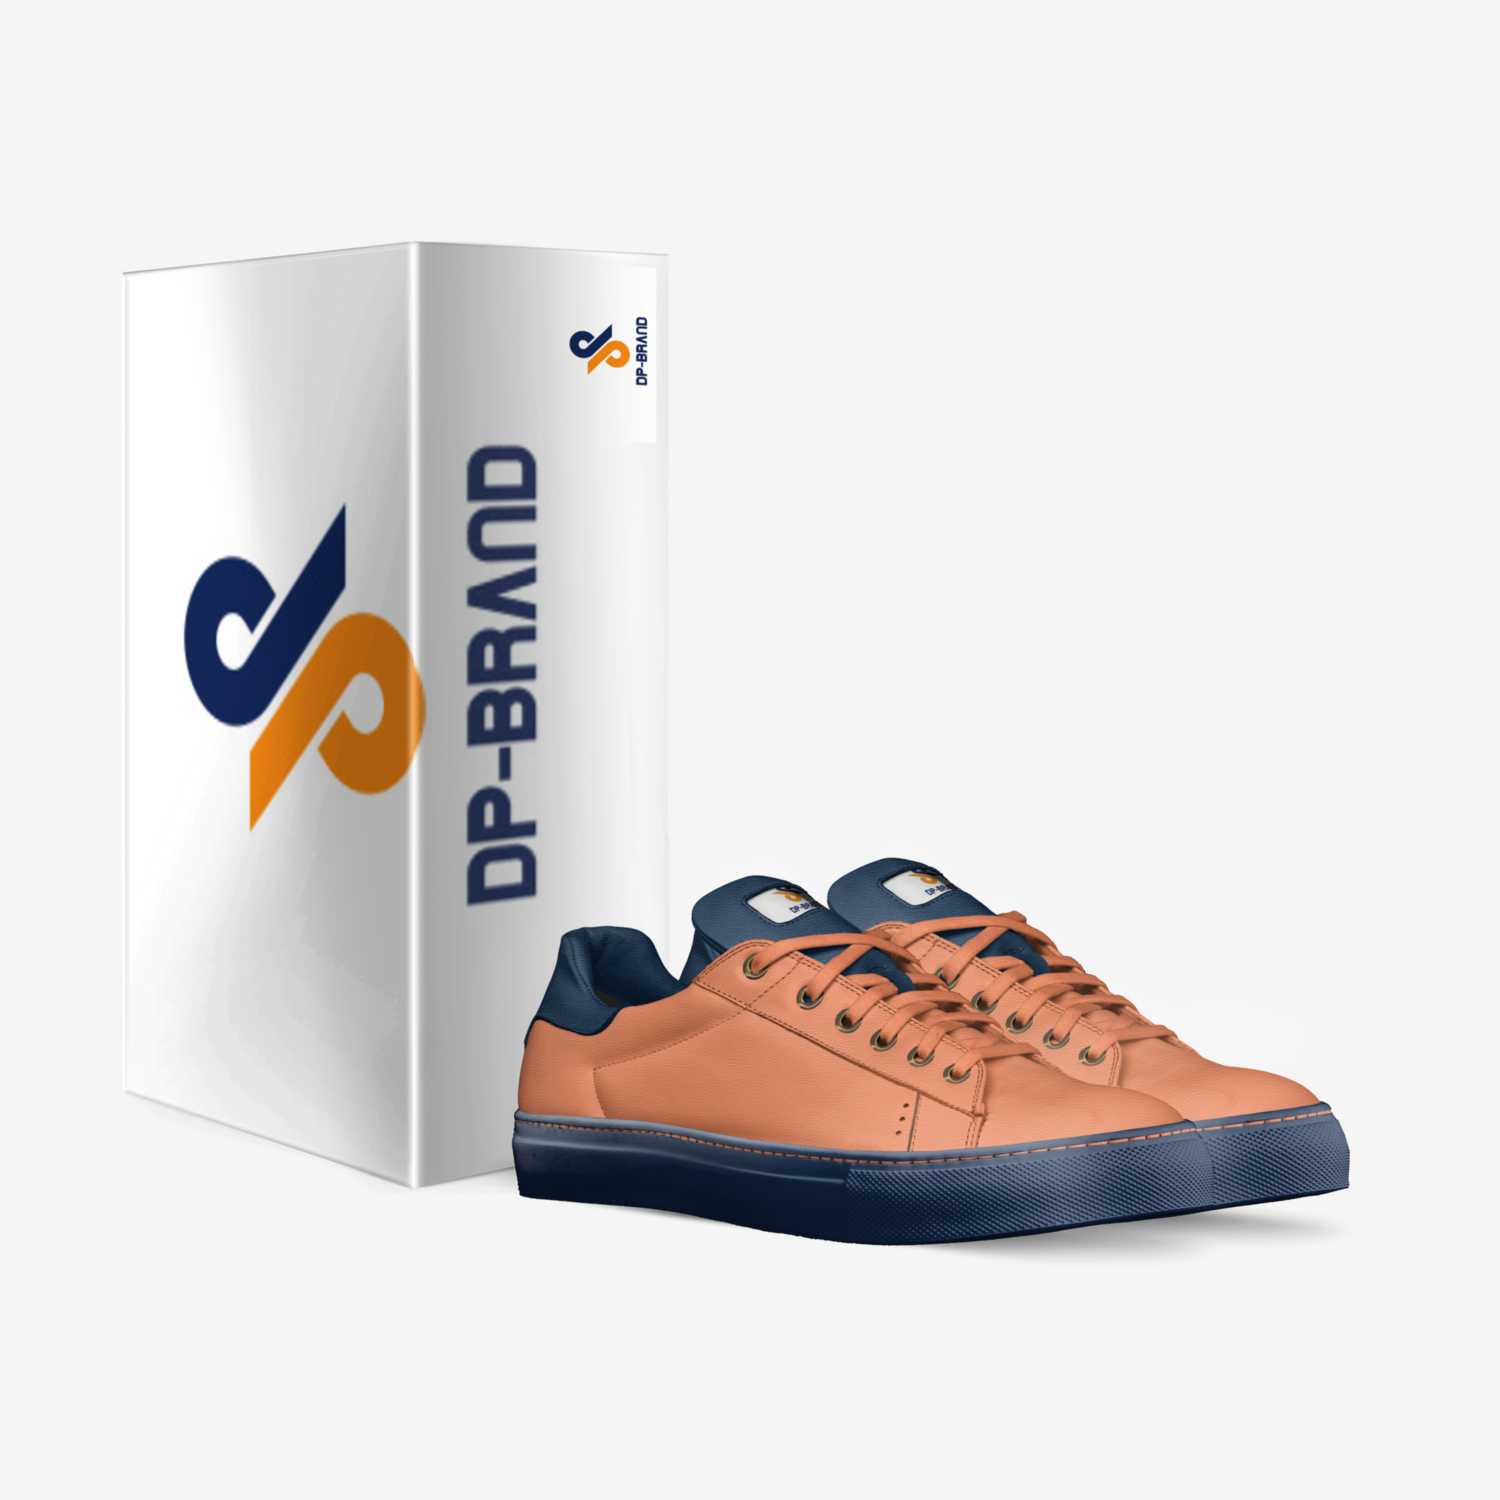 DP-BRAND custom made in Italy shoes by Derrick Perkins | Box view